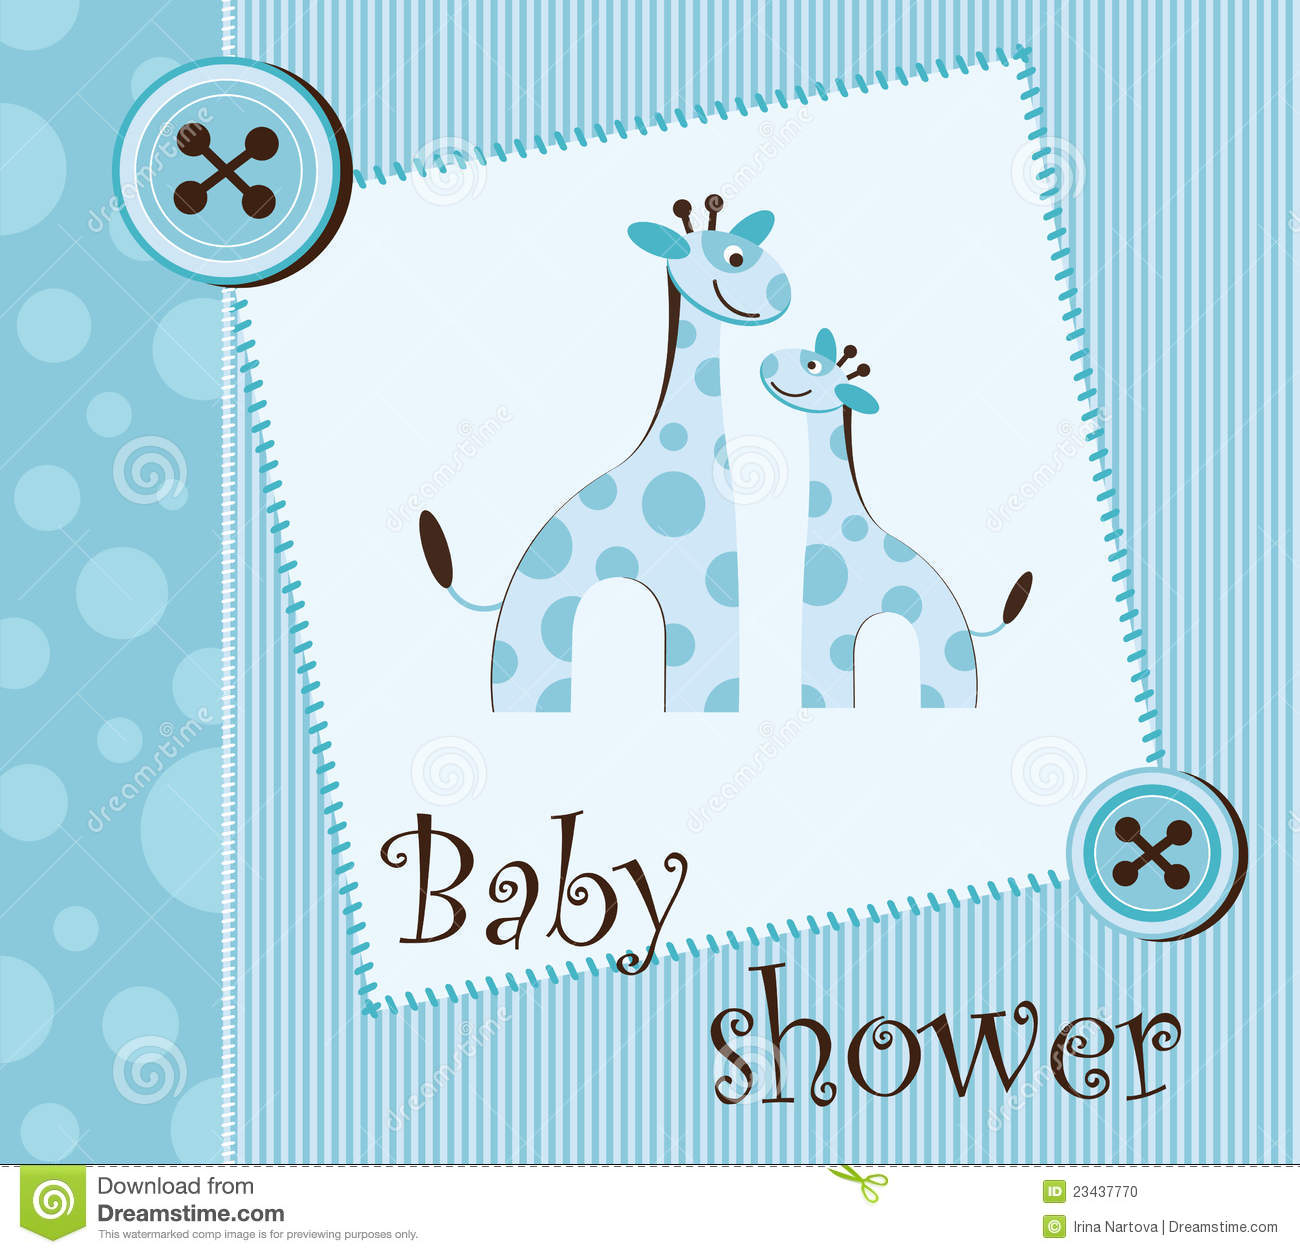 baby shower pictures clip art for a boy - photo #33